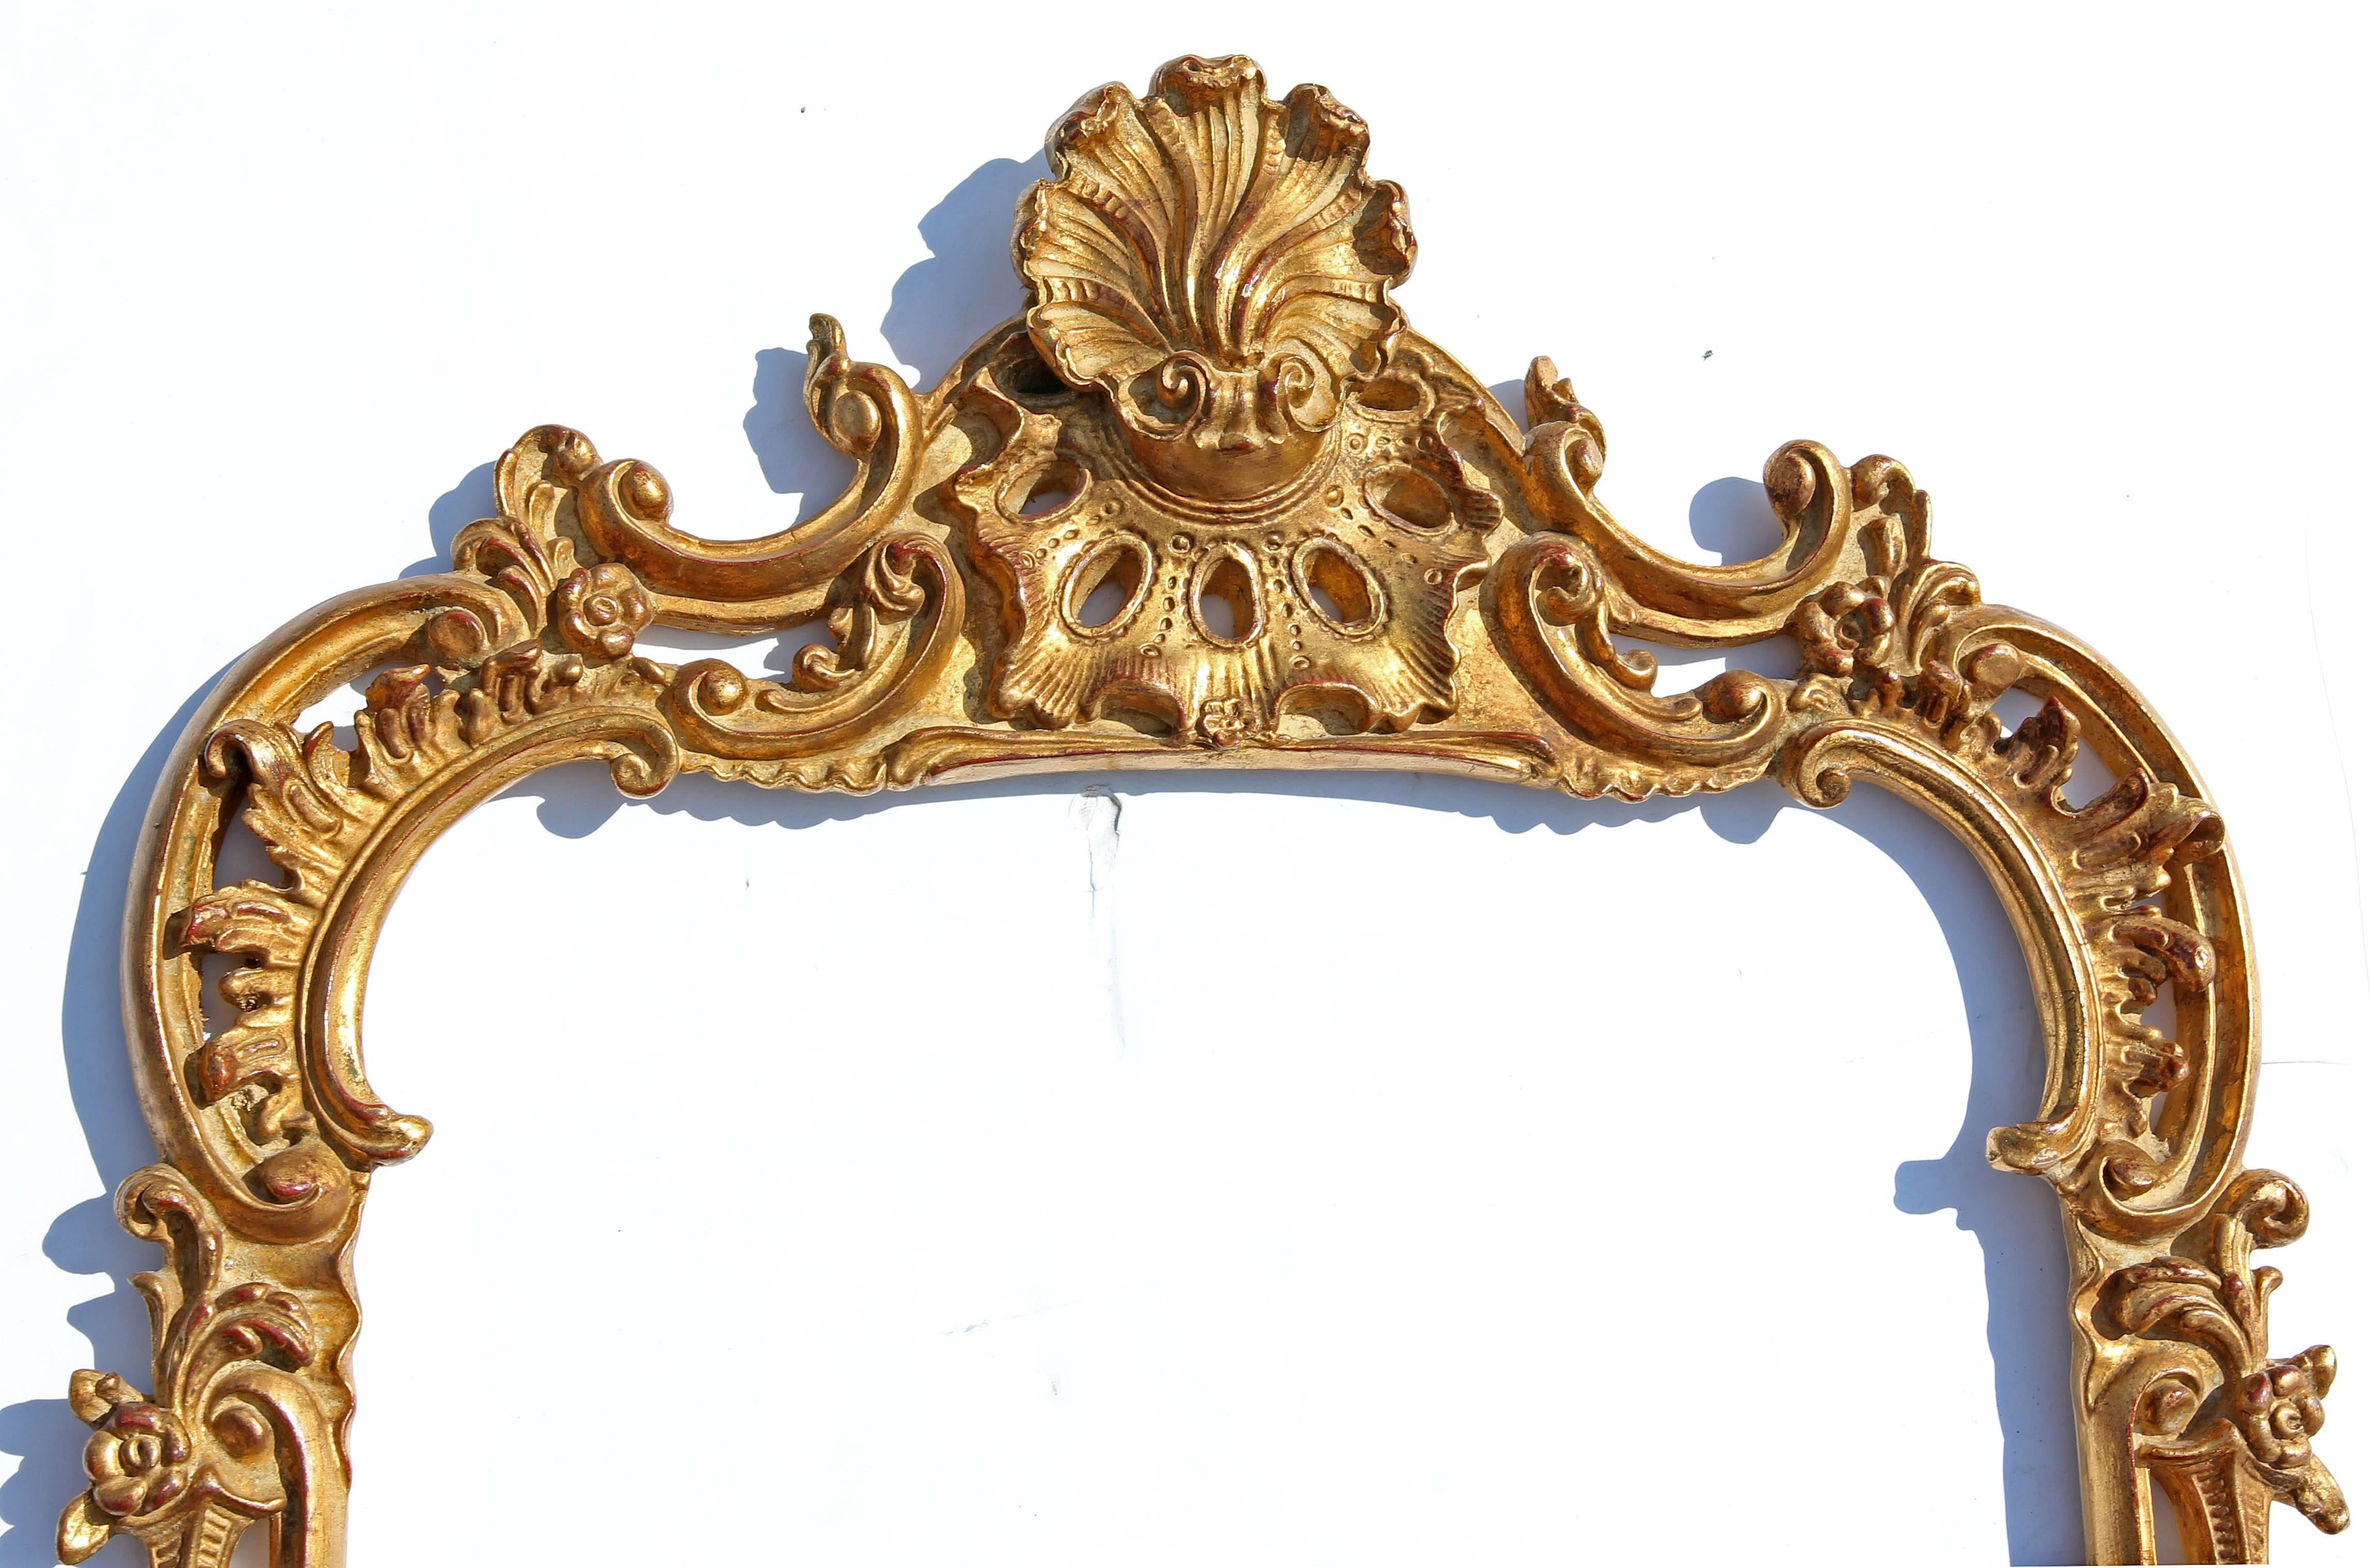 Chippendale style gilt mirror made by Carvers Guild.